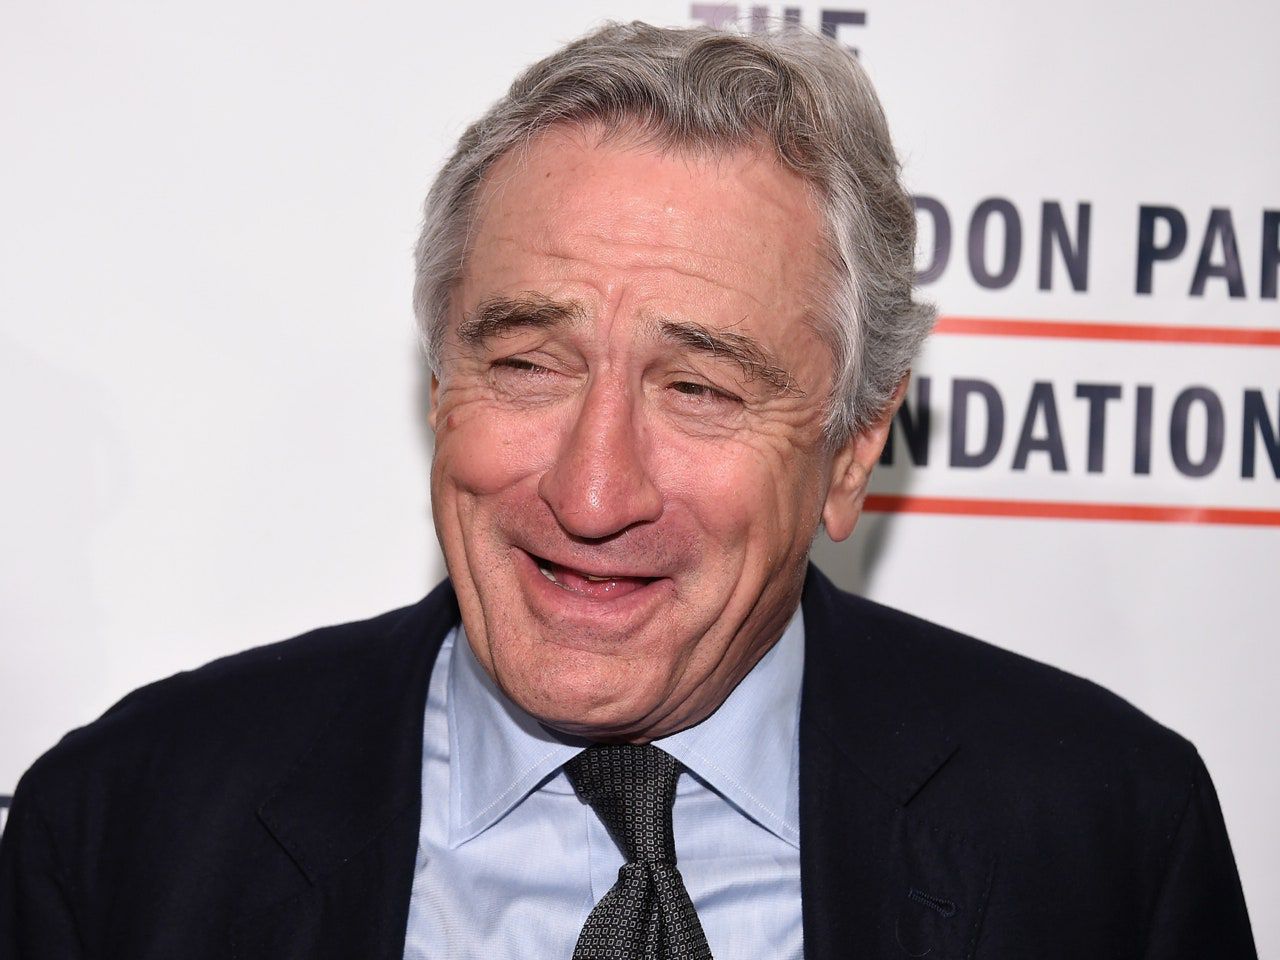 Robert De Niro says he would like to play Cuomo in pandemic movie'